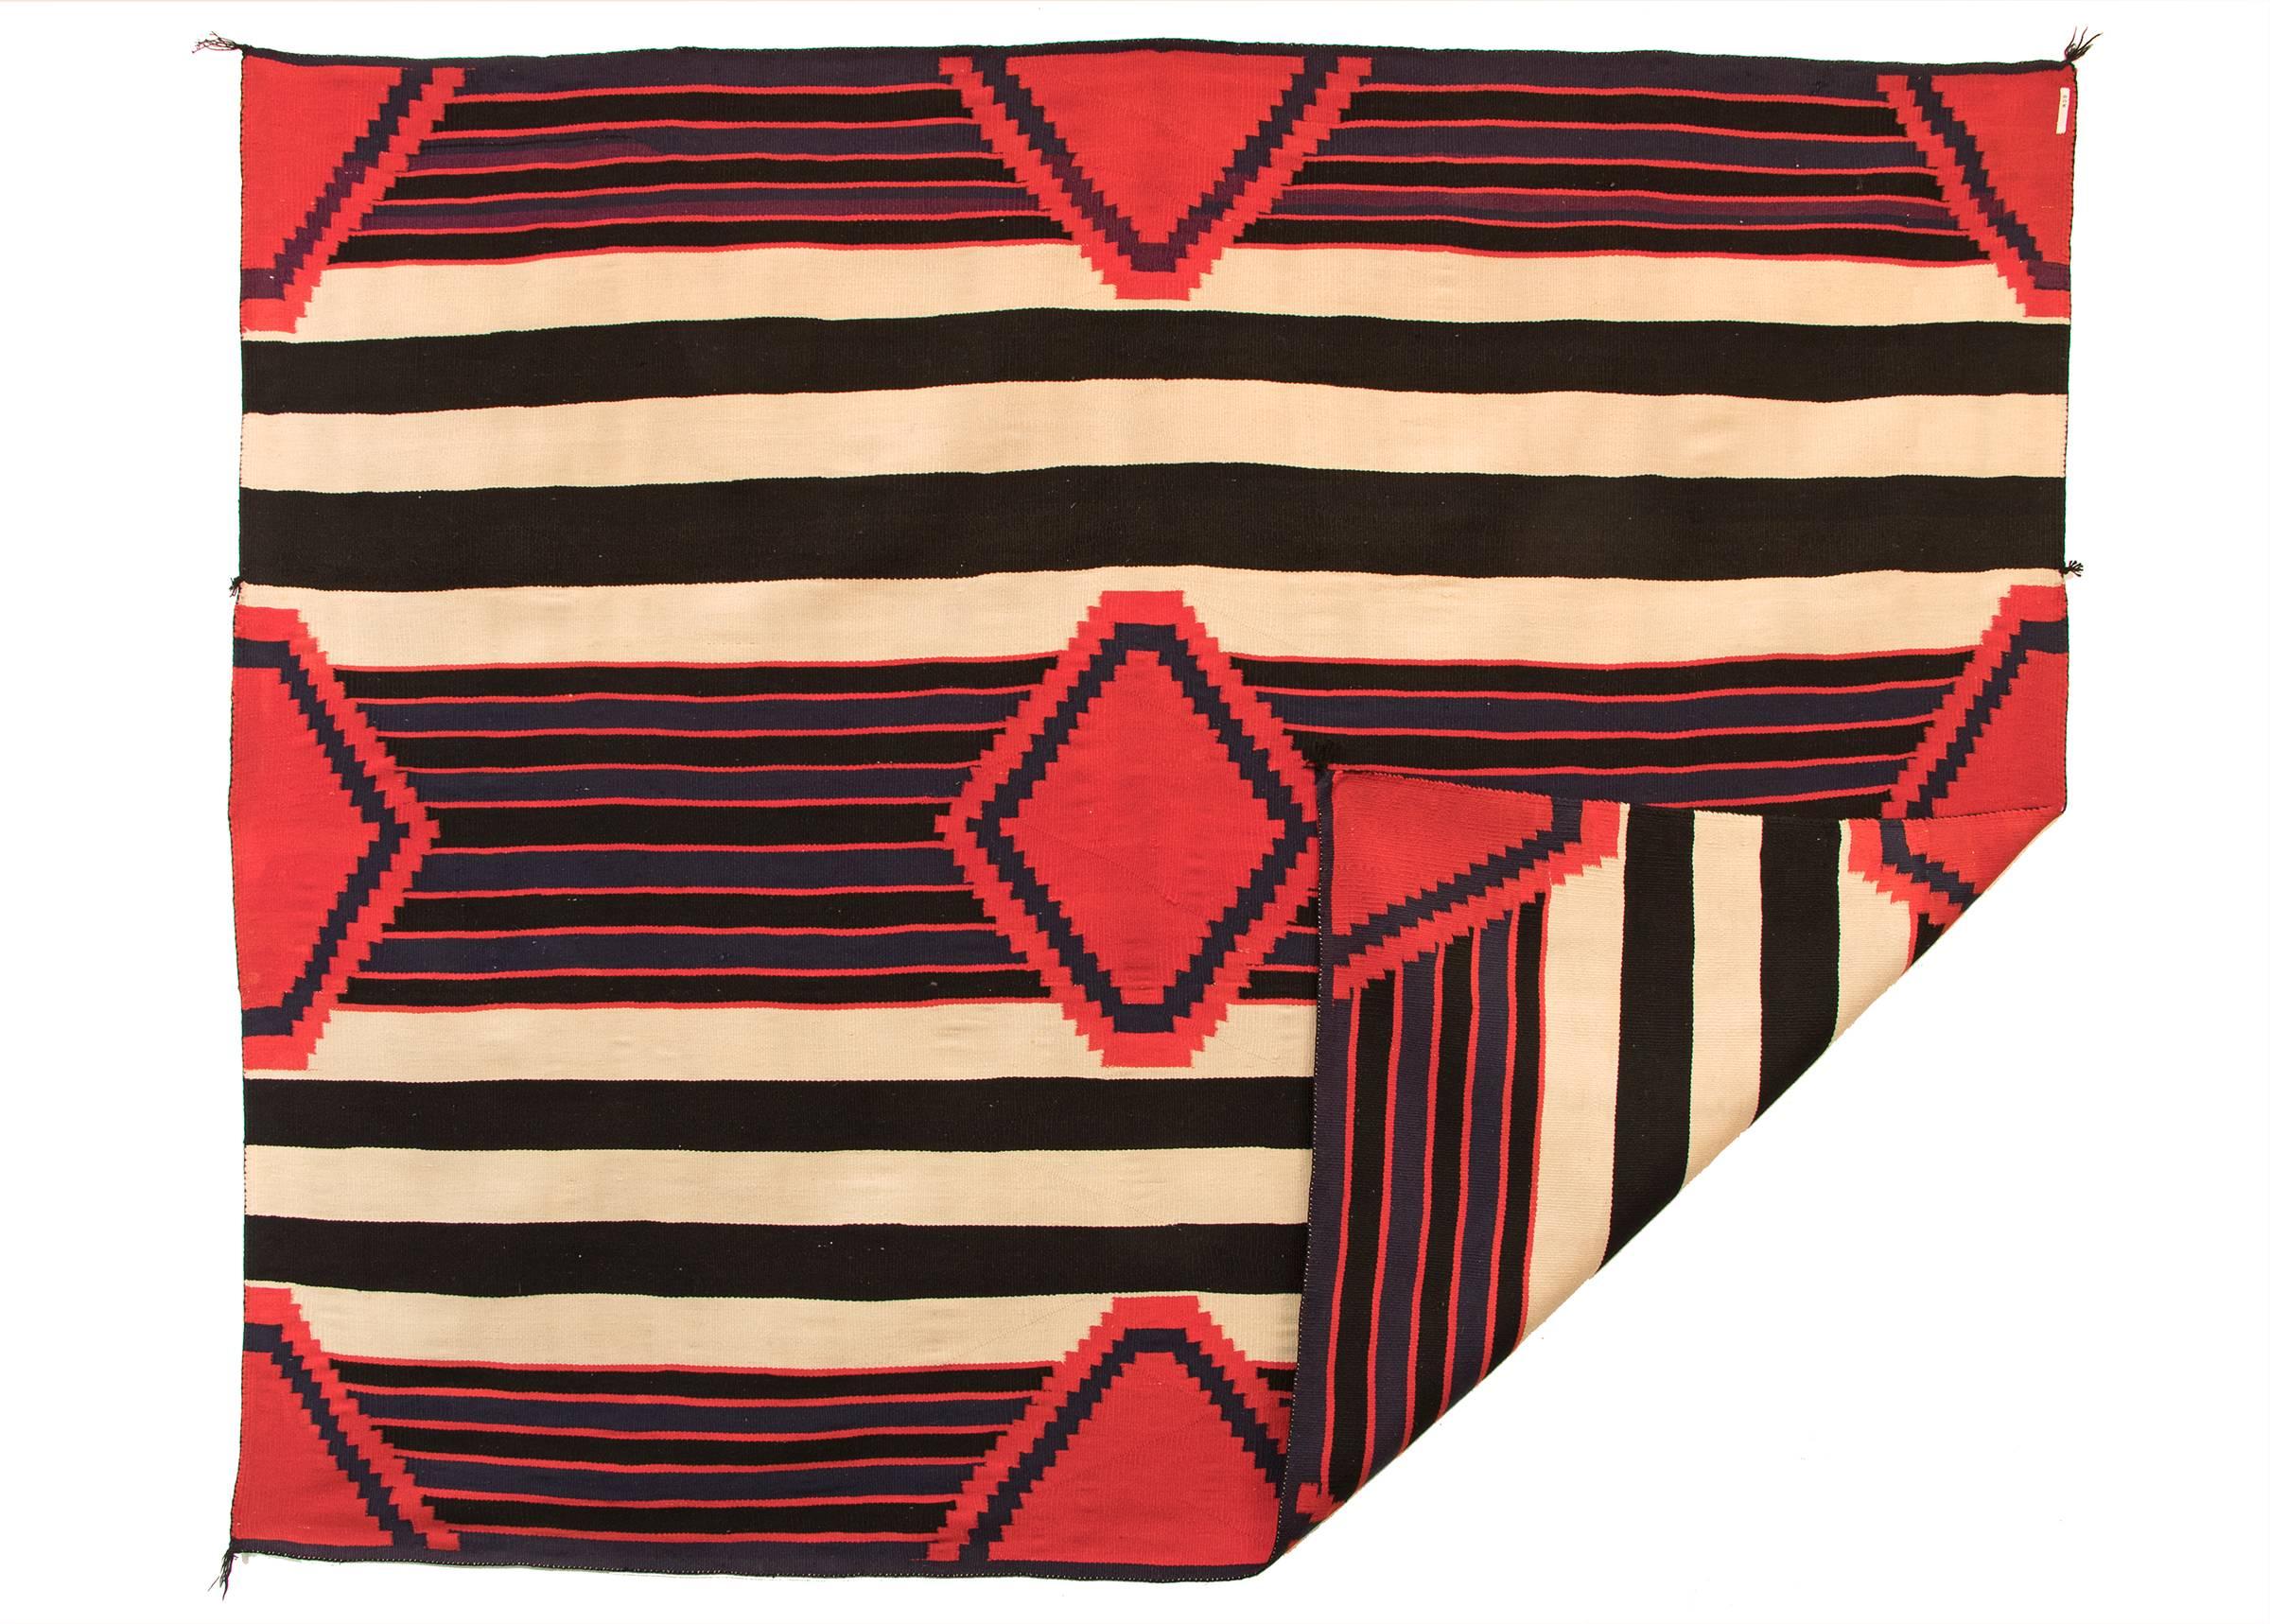 A Navajo chiefs wearing blanket in a traditional third phase design with a nine-point diamond pattern. Woven of four-ply Germantown wool.

Expedited and international shipping is available; please contact us for an estimate.